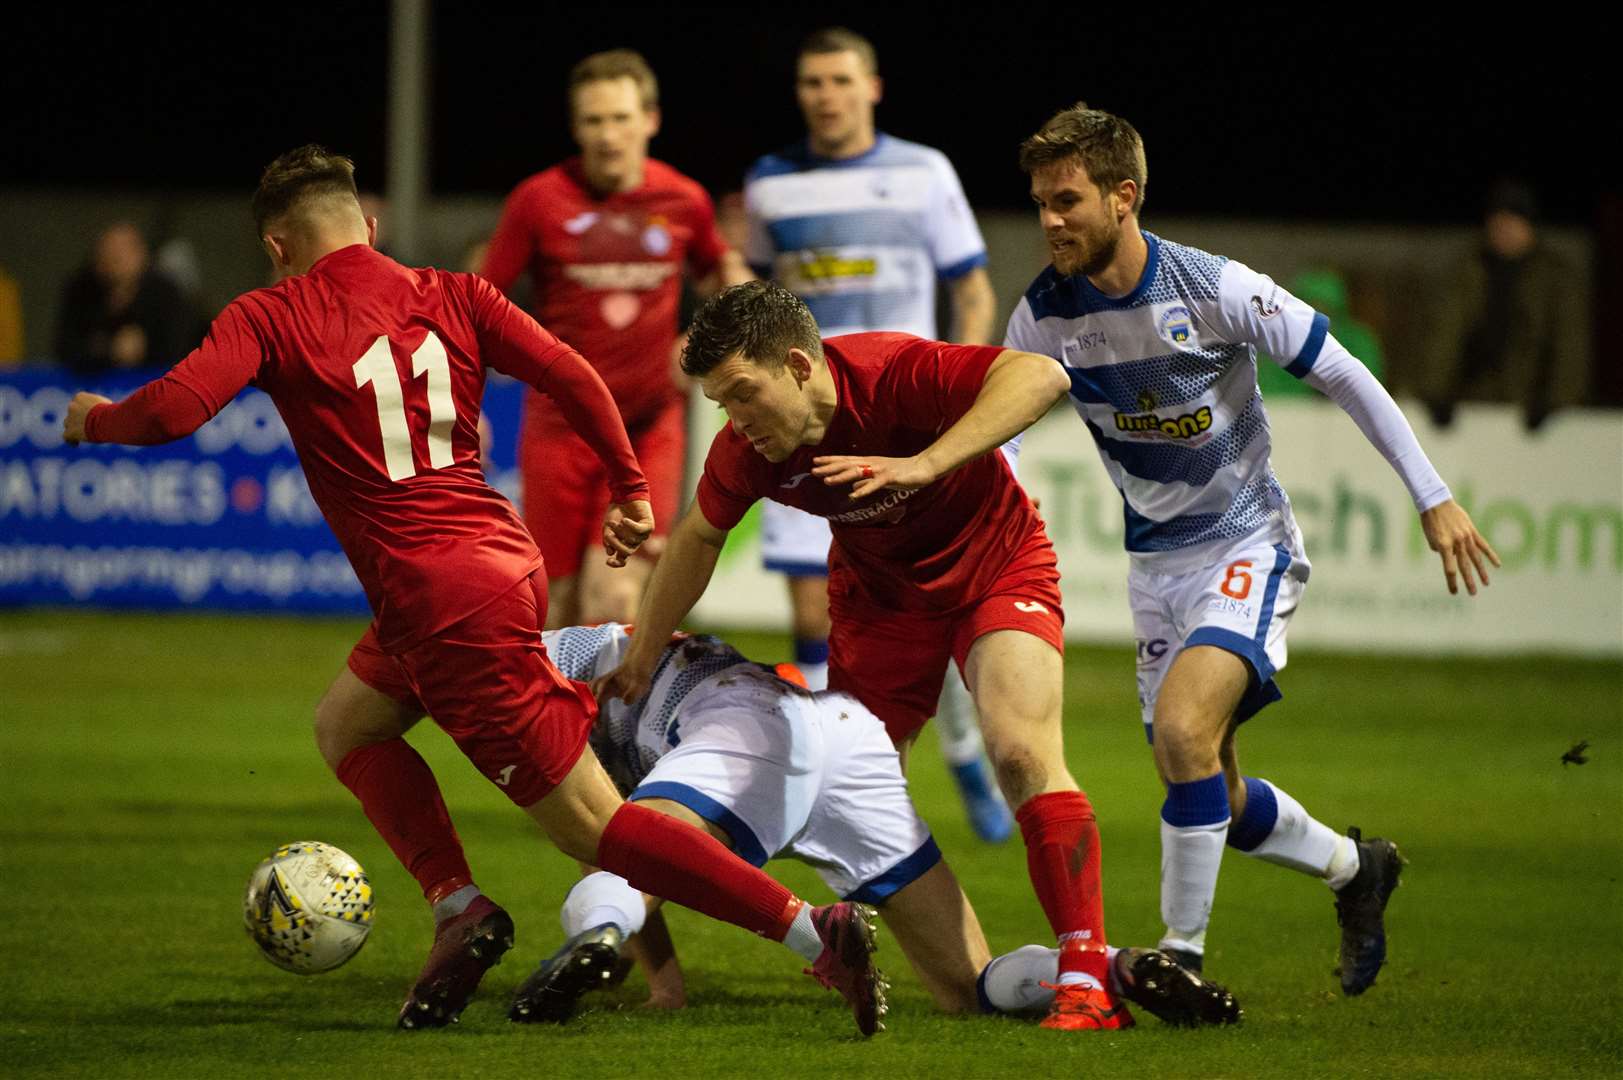 Brora Rangers in action against SPFL side Greenock Morton in a Scottish Cup tie in December. Picture: Callum Mackay